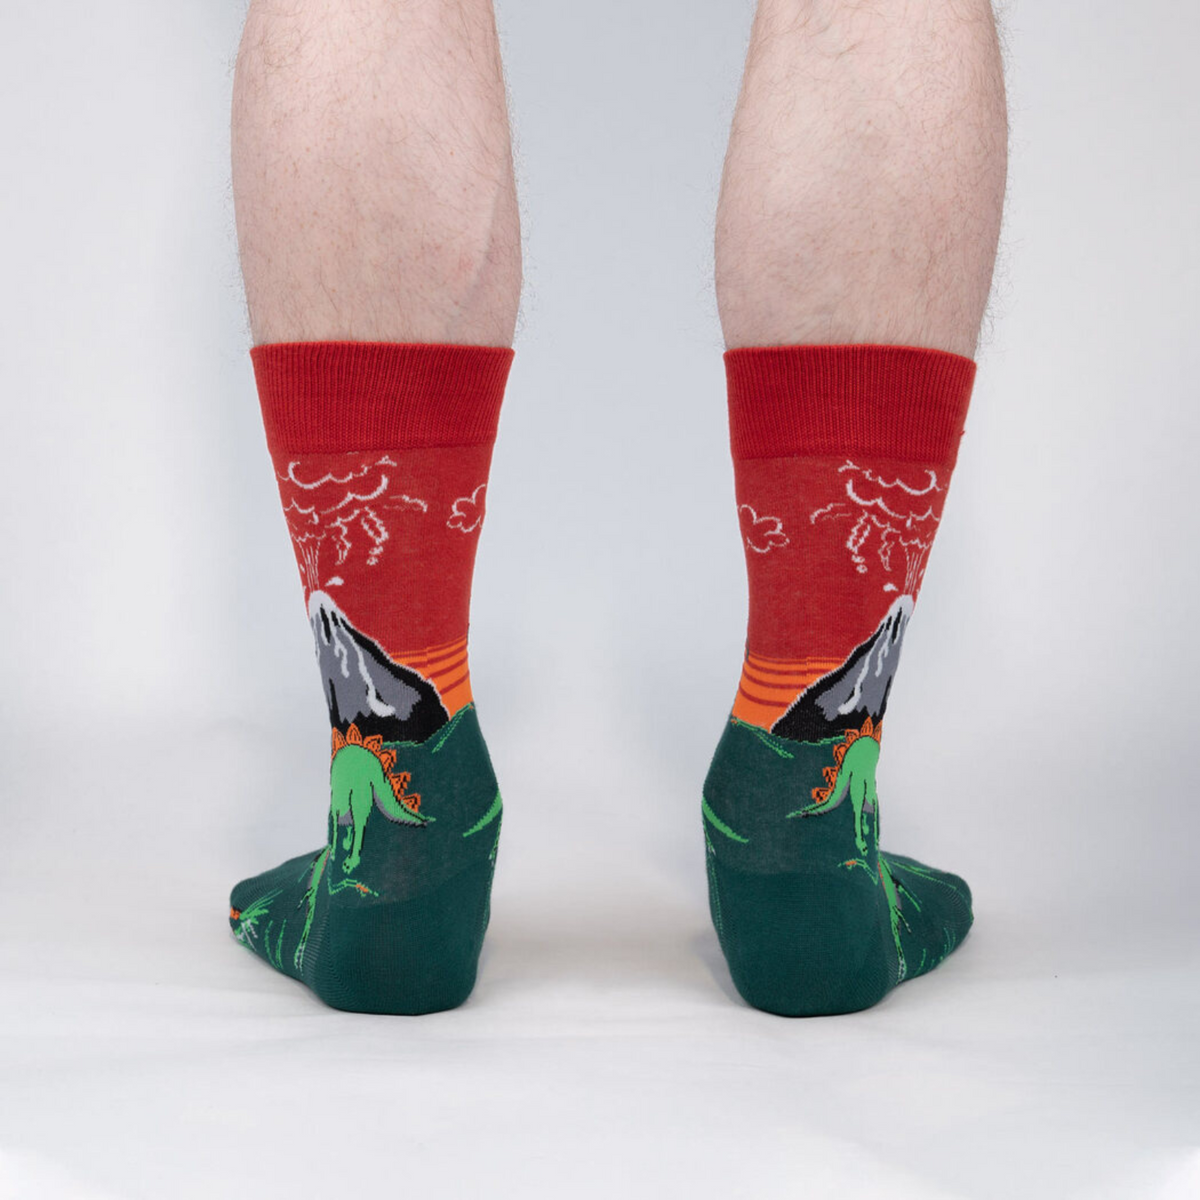 Sock It To Me Dinosaur Days men&#39;s crew socks featuring red and green socks with glow in the dark exploding volcanoes and dinosaurs. Socks shown on model from behind. 